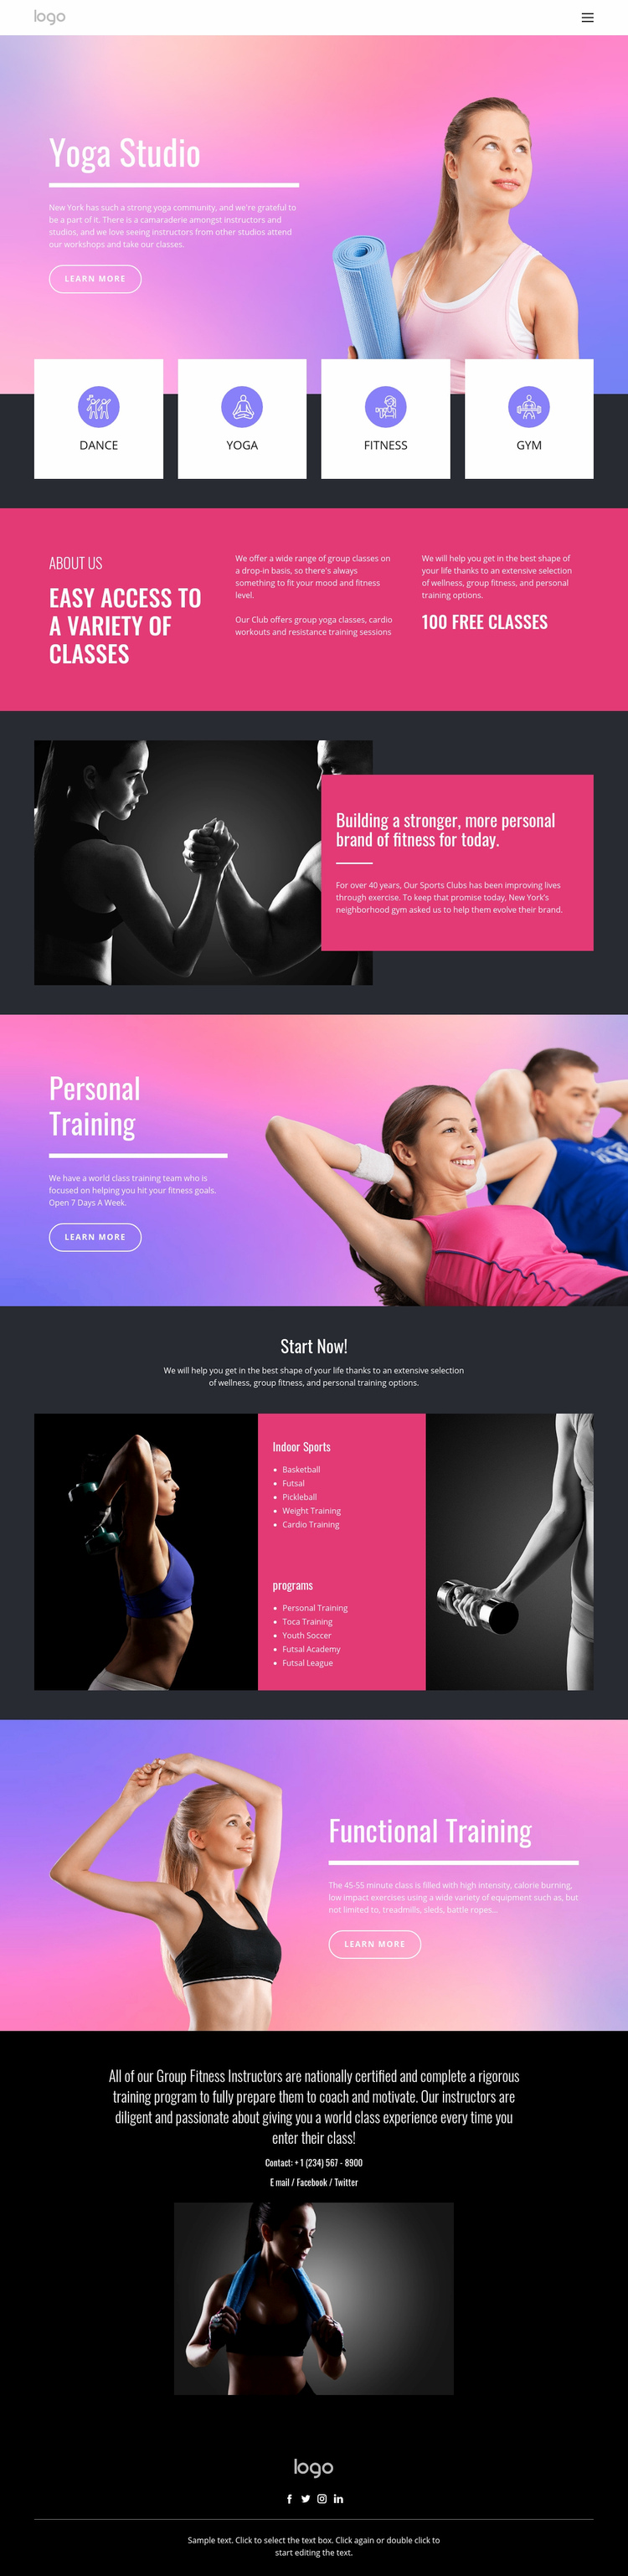 Wellness practice for self-inquiry Squarespace Template Alternative